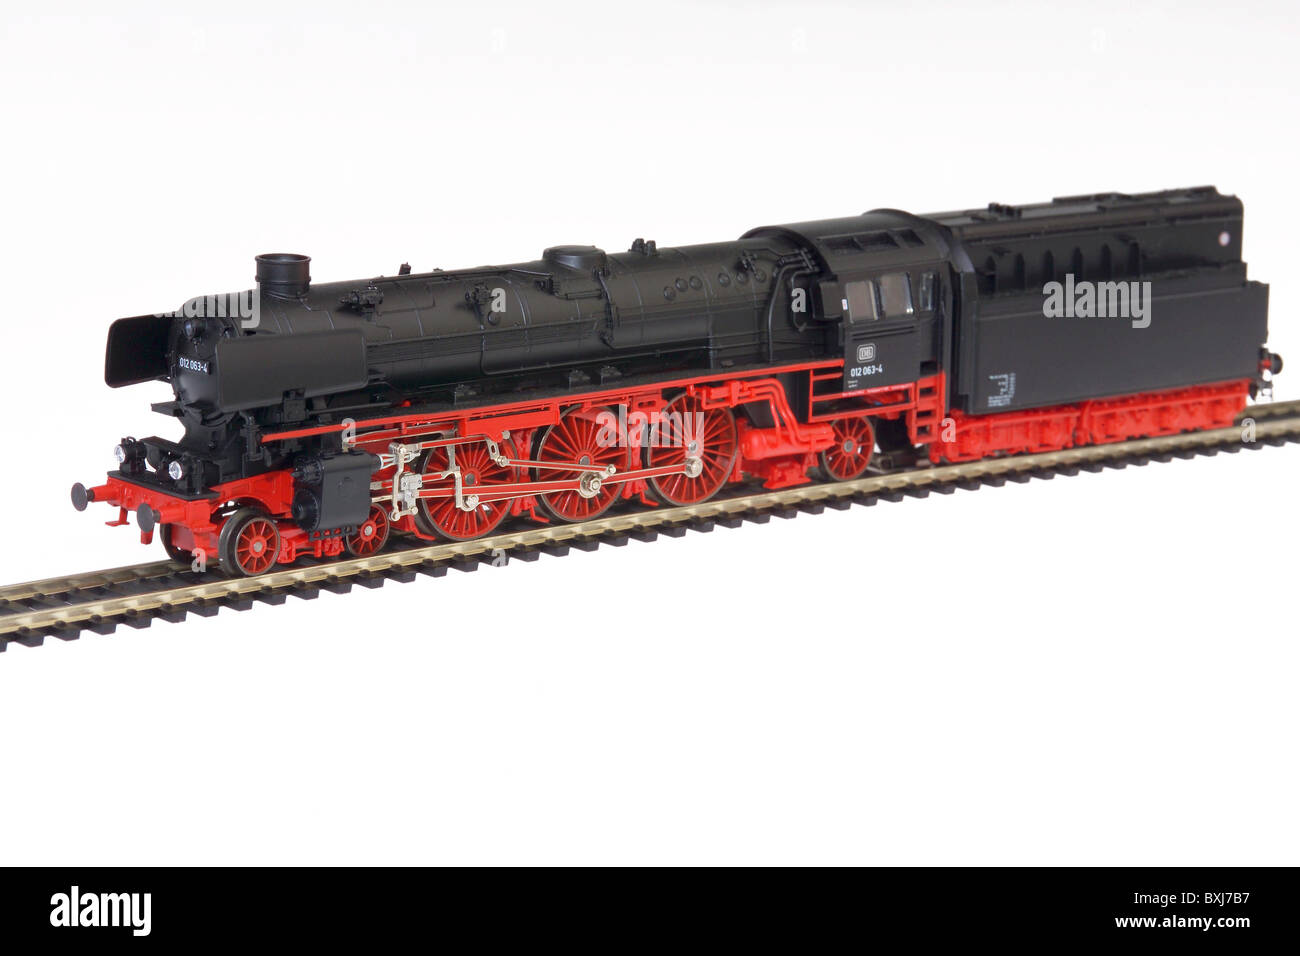 toys, model railway, Maerklin locomotive, type 012, Reichsbahn, Germany, 1937, historic, historical, 1930s, 30s, 20th century, engine, drive train, steam power, antiquity, antiquities, toy, Made in Germany, clipping, cut out, Marklin, cut-out, cut-outs, Additional-Rights-Clearences-Not Available Stock Photo